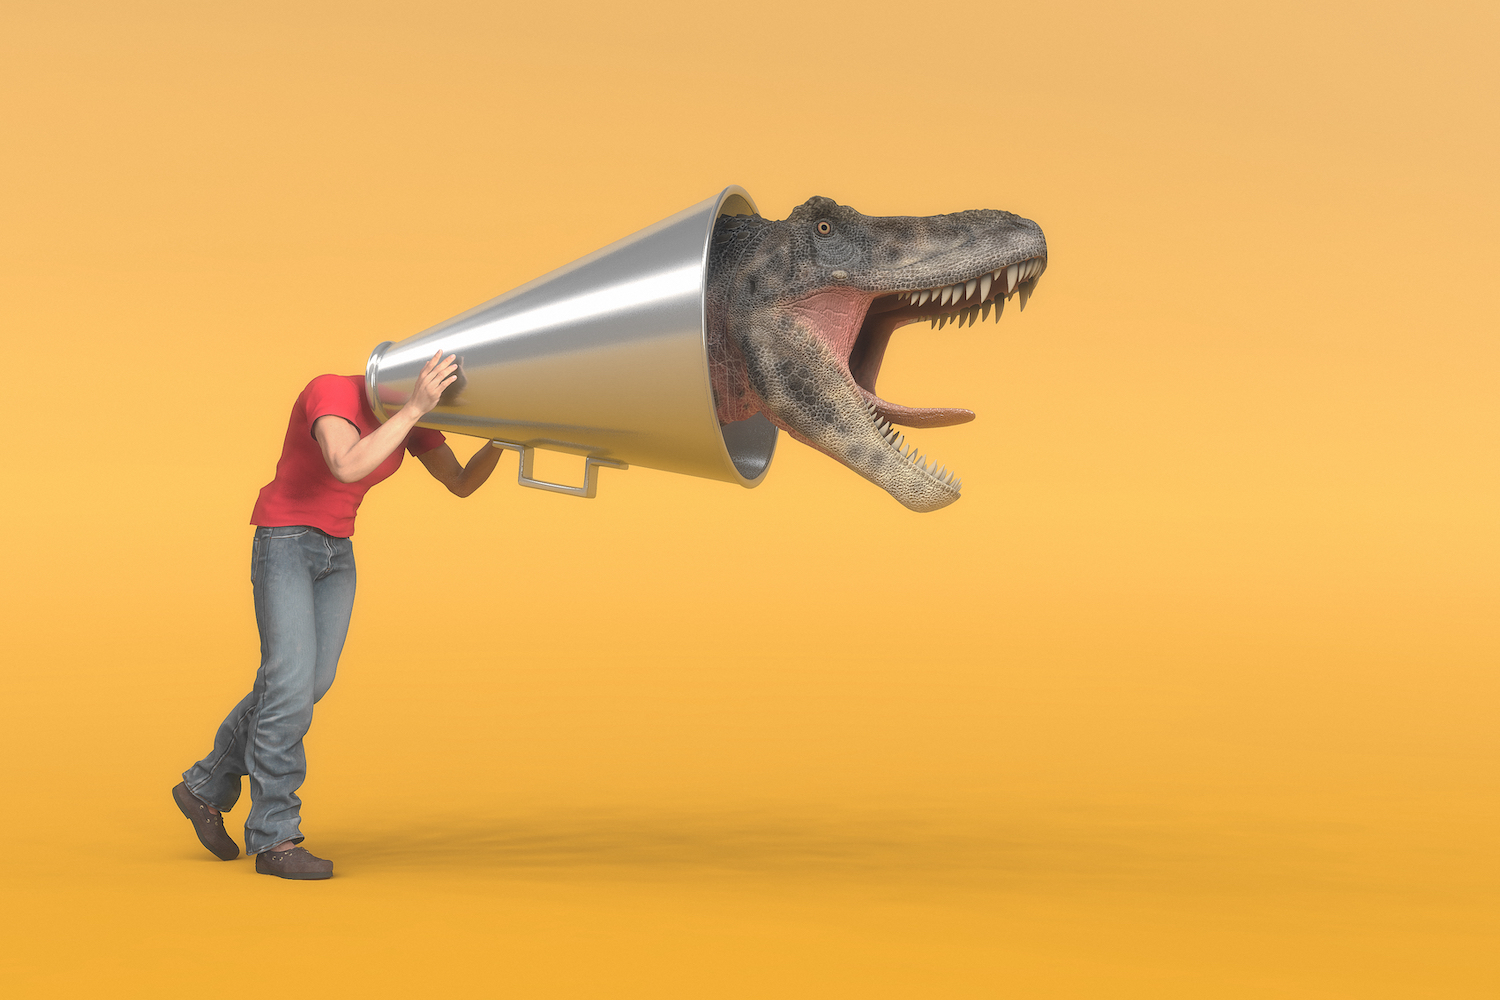 Man Puts His Head Into A Megaphone And At The End It Comes Out A Dinosaur Head Screaming. This Is A 3d Render Illustration By Orla Copy